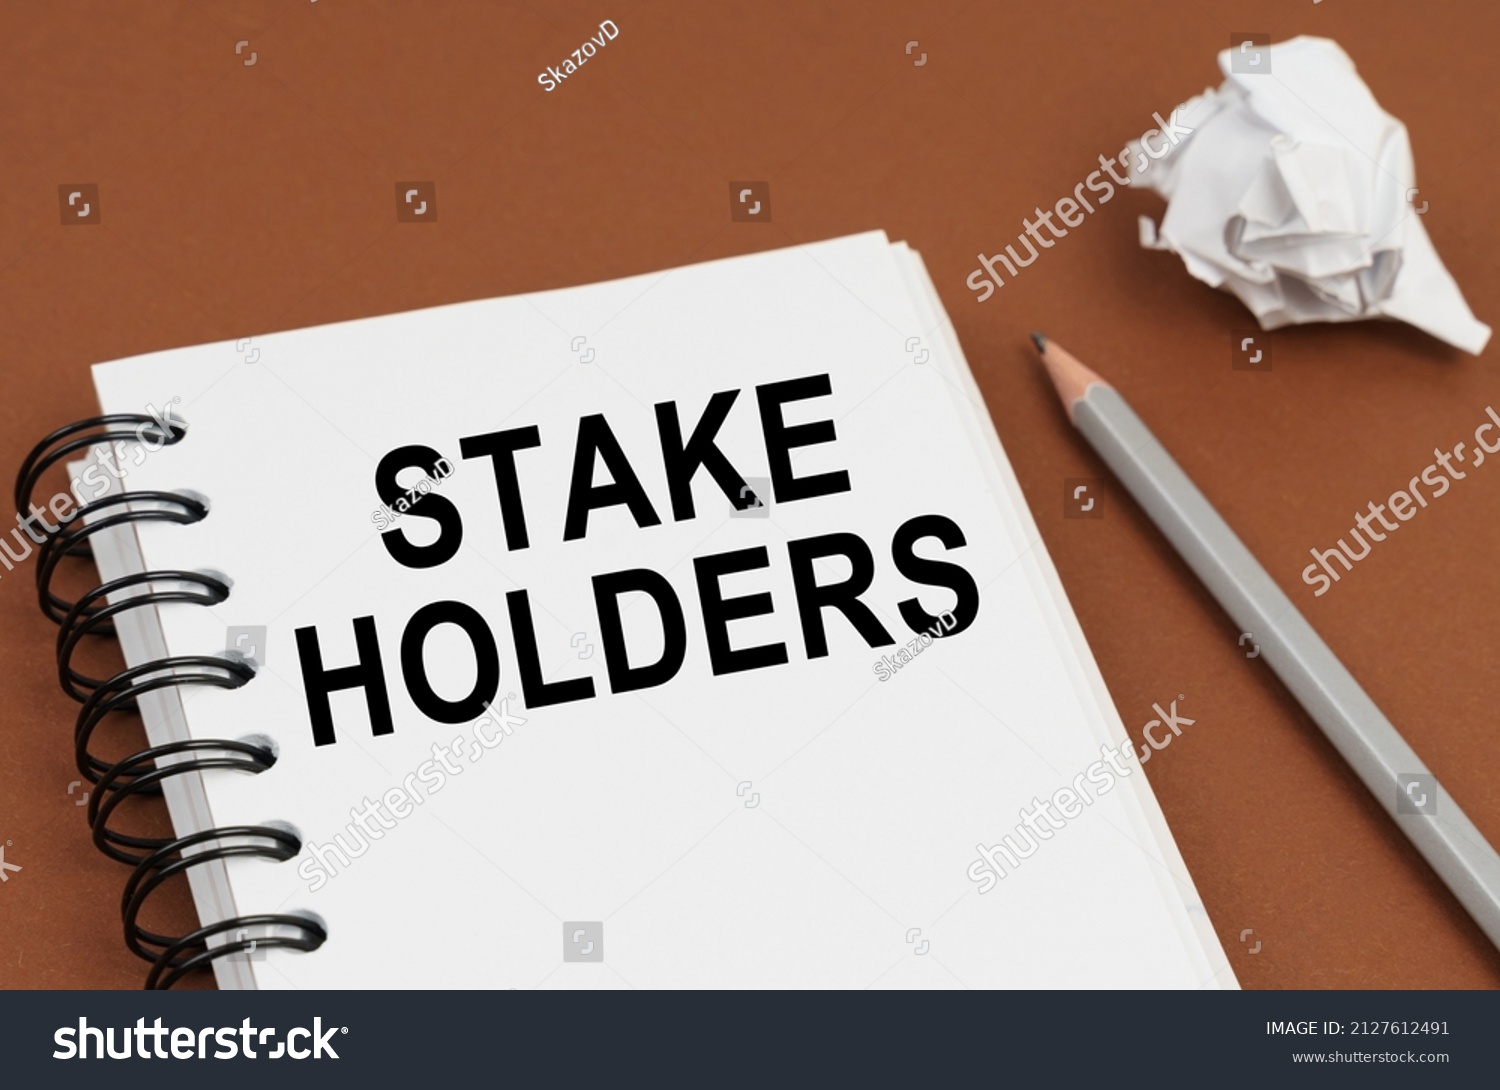 Business and finance concept. On a brown surface lies a pen, crumpled paper and a notepad with the inscription - STAKE HOLDERS #2127612491